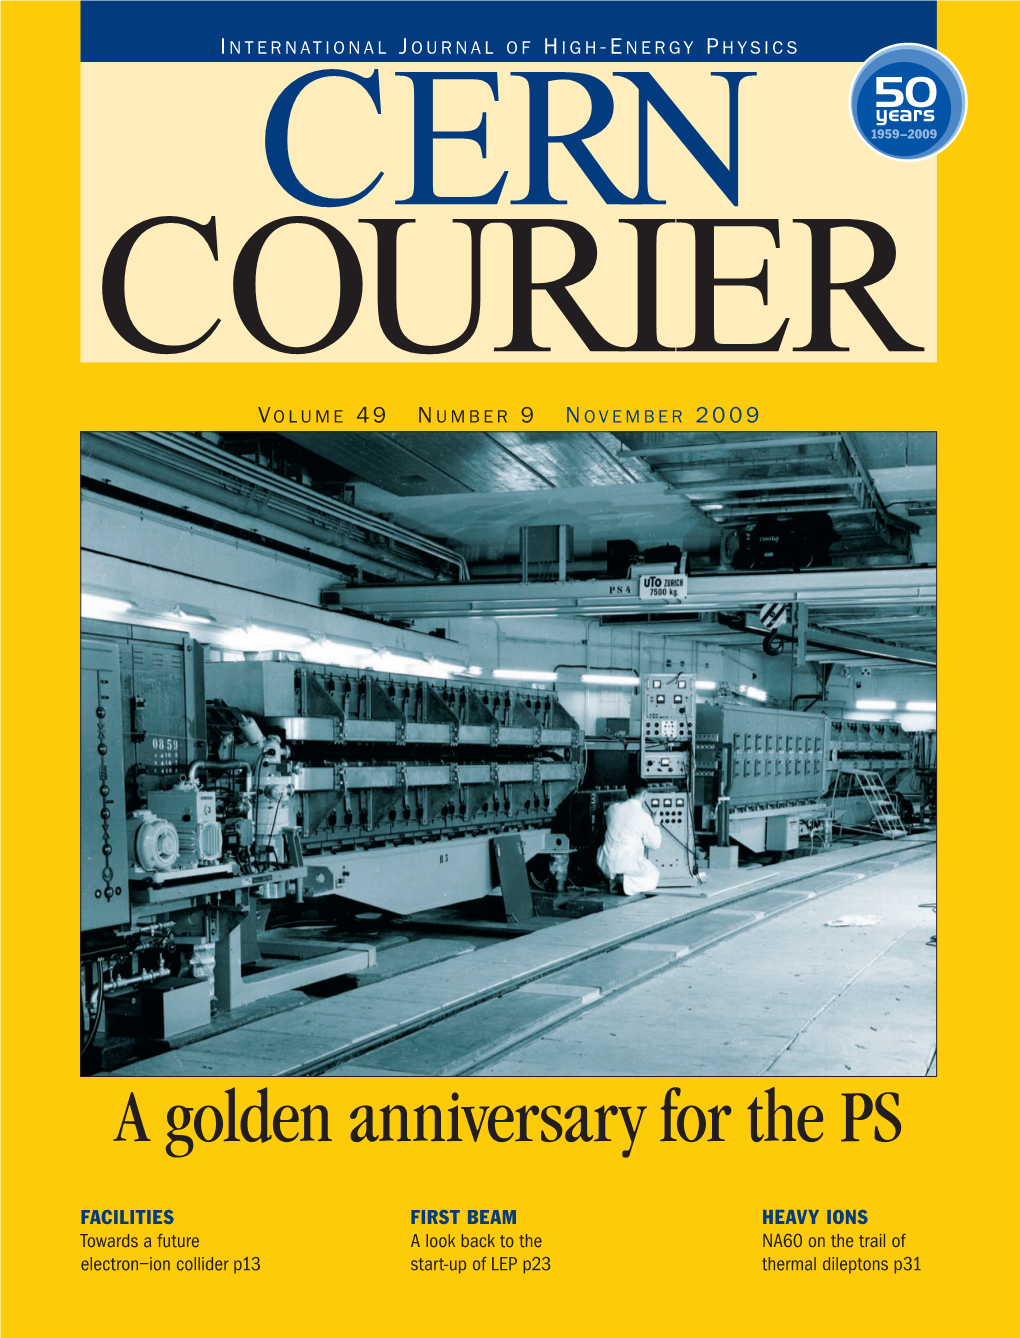 A Golden Anniversary for the PS